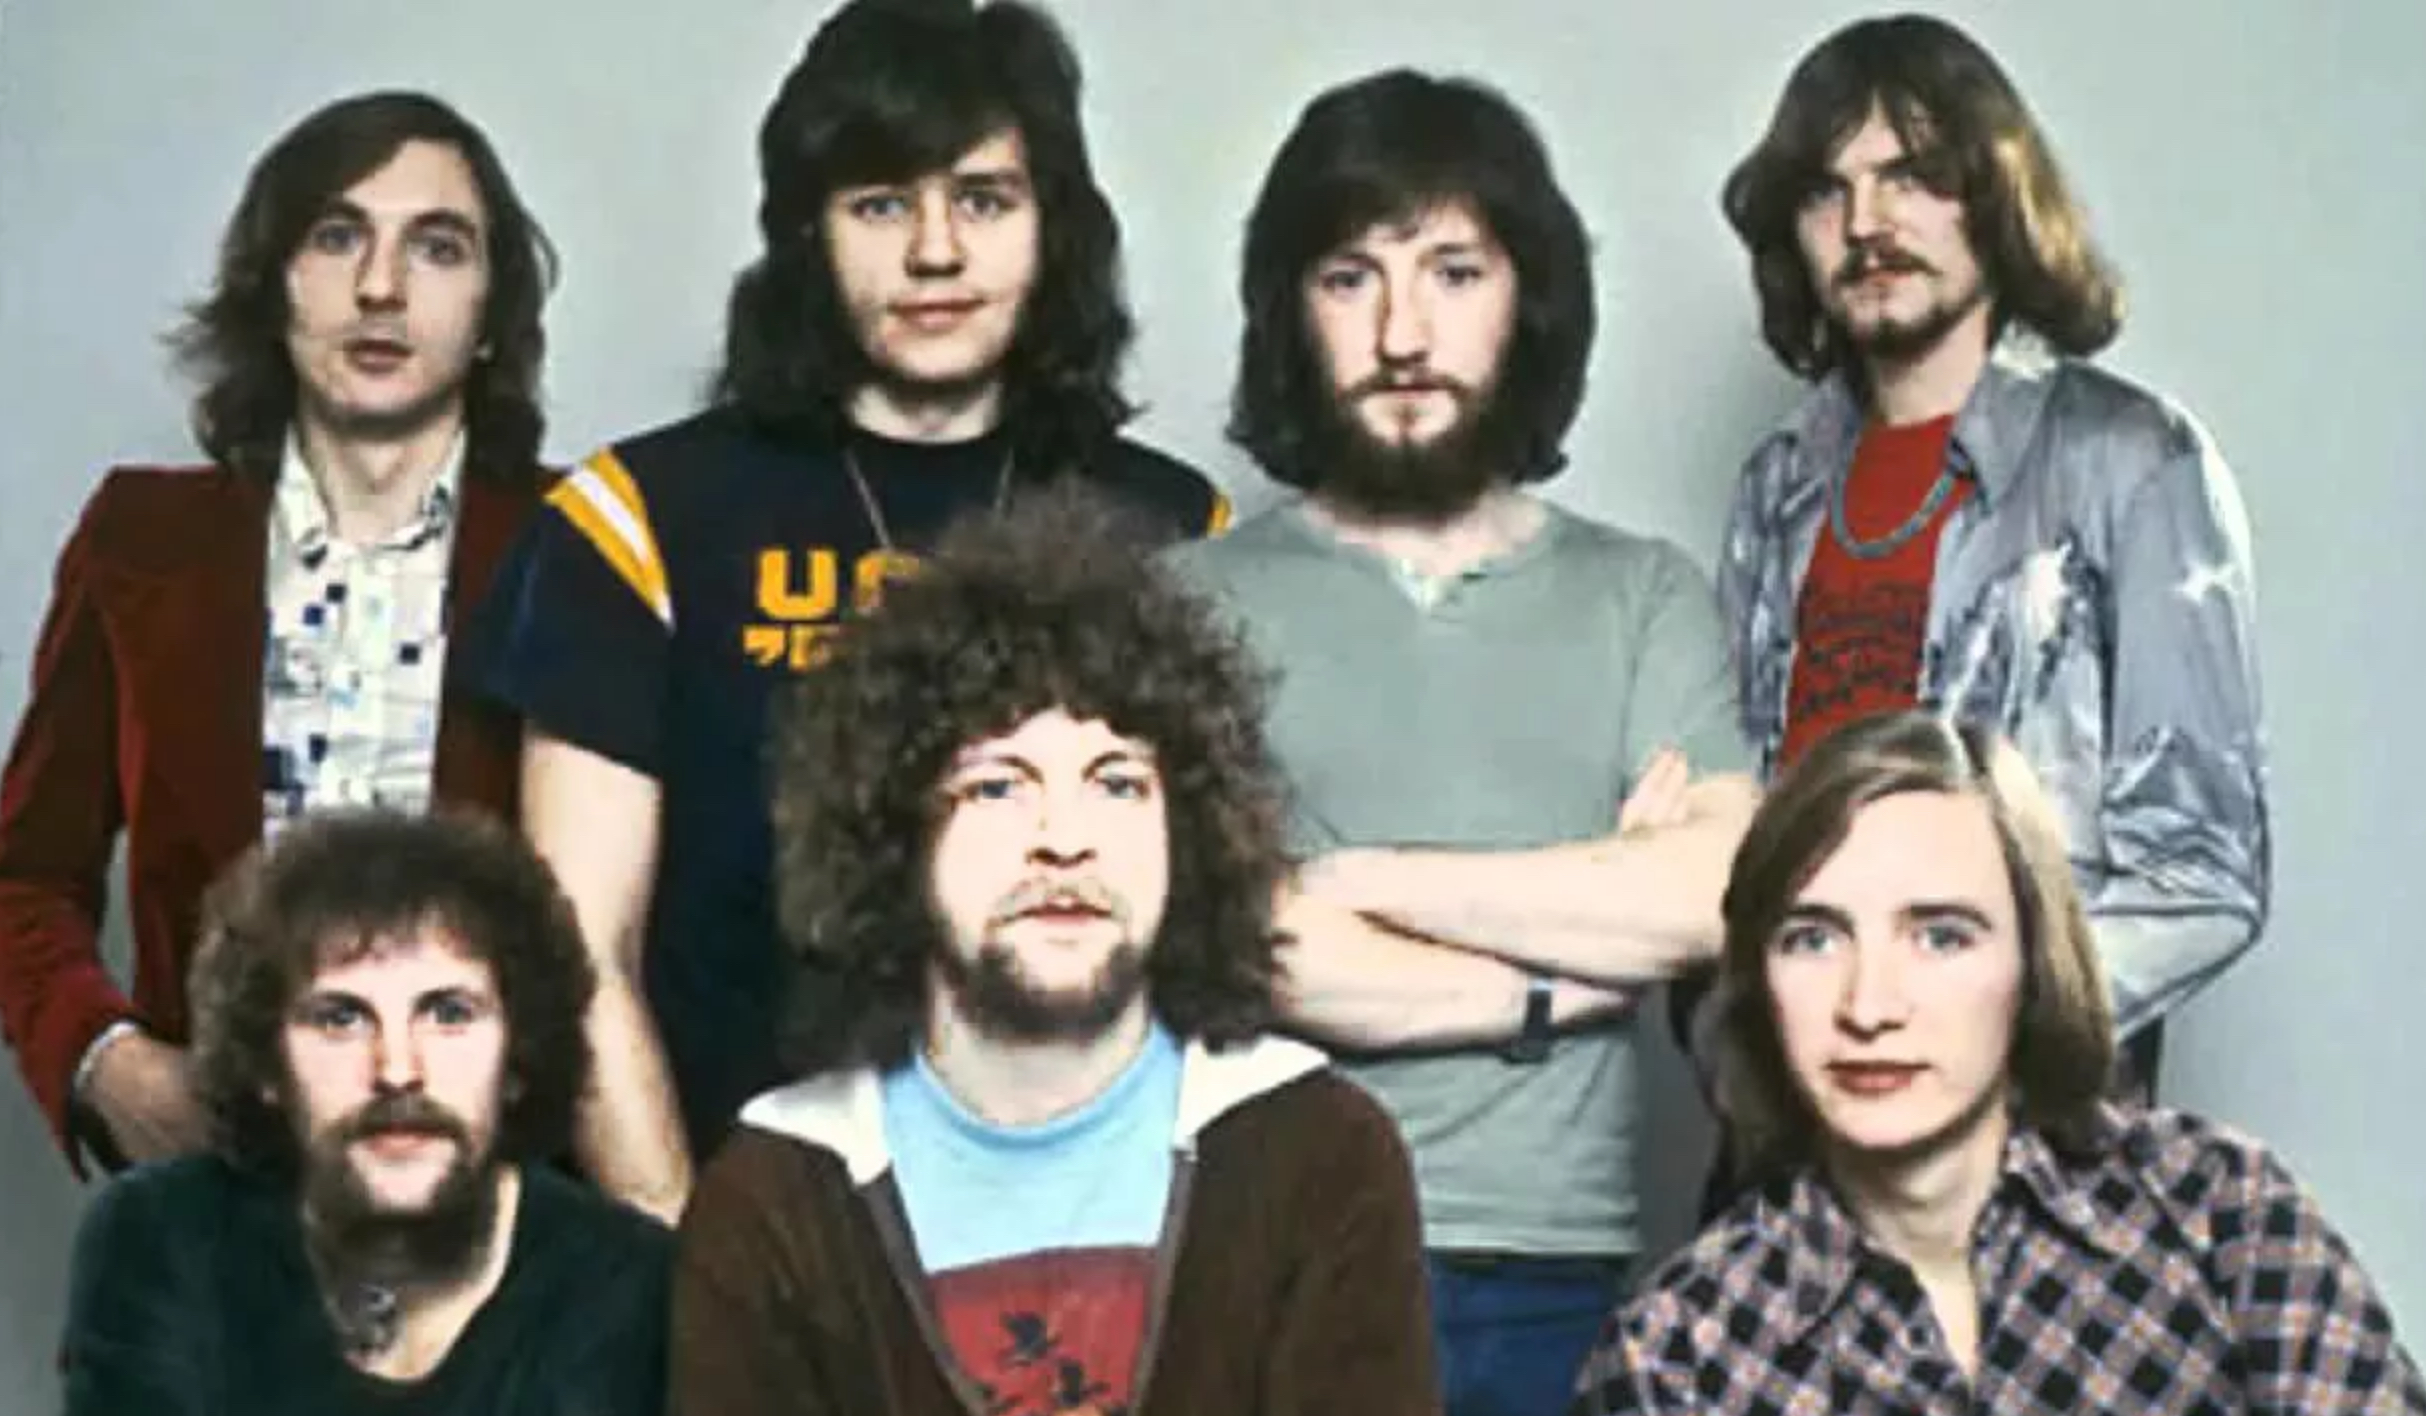 Elo electric light orchestra. Эло группа. Electric Light Orchestra 1977. Группа Electric Light Orchestra 1974. E.L.O. группа.